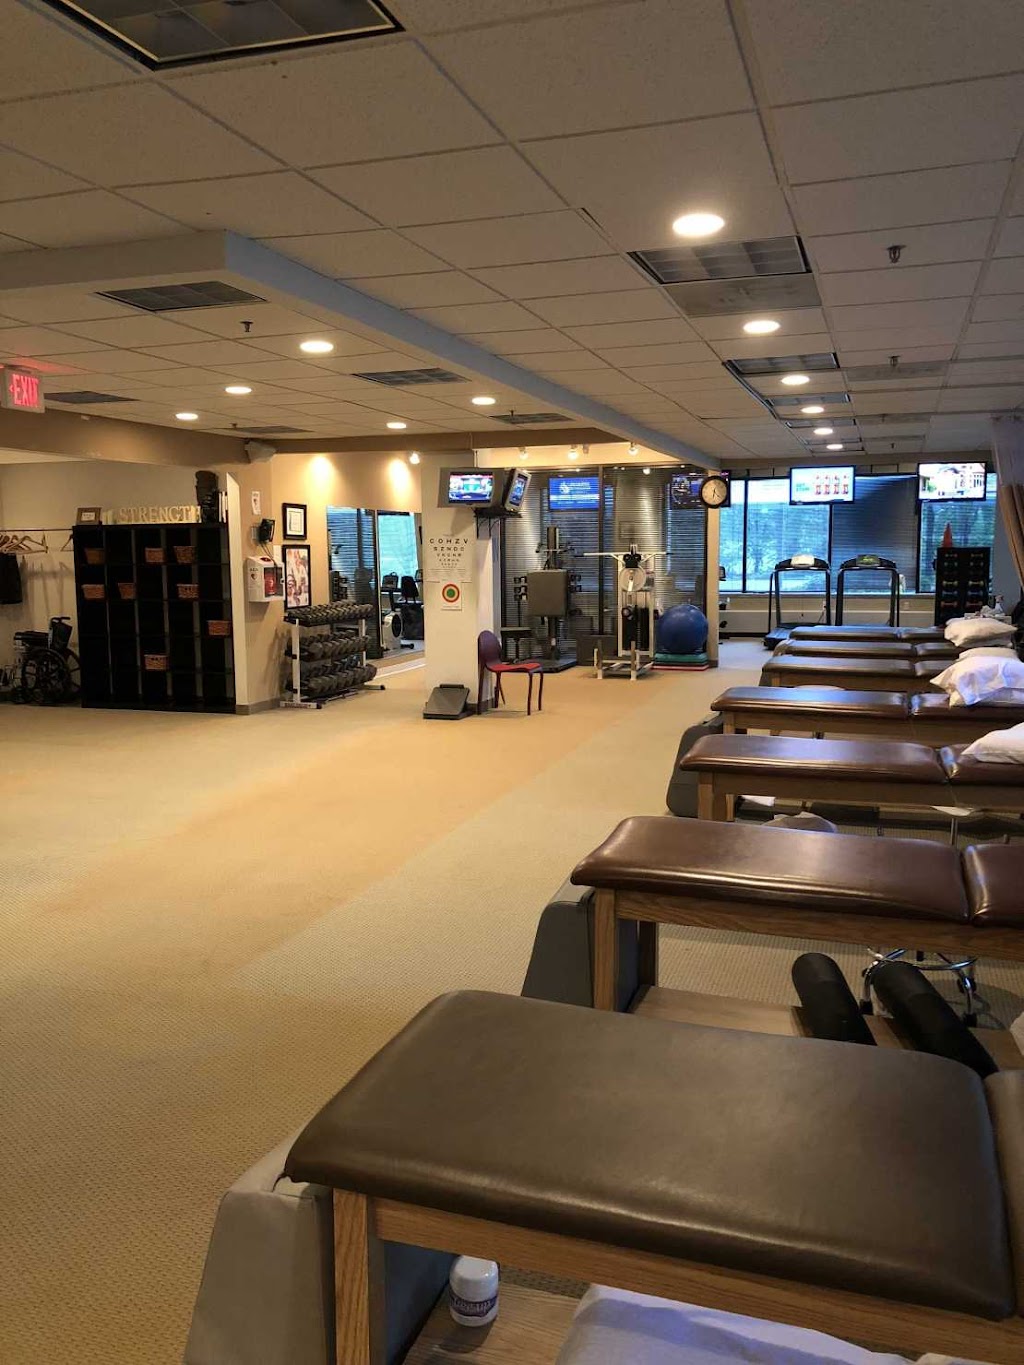 Professional Physical Therapy | 76 Passaic Ave, Florham Park, NJ 07932 | Phone: (973) 685-6303